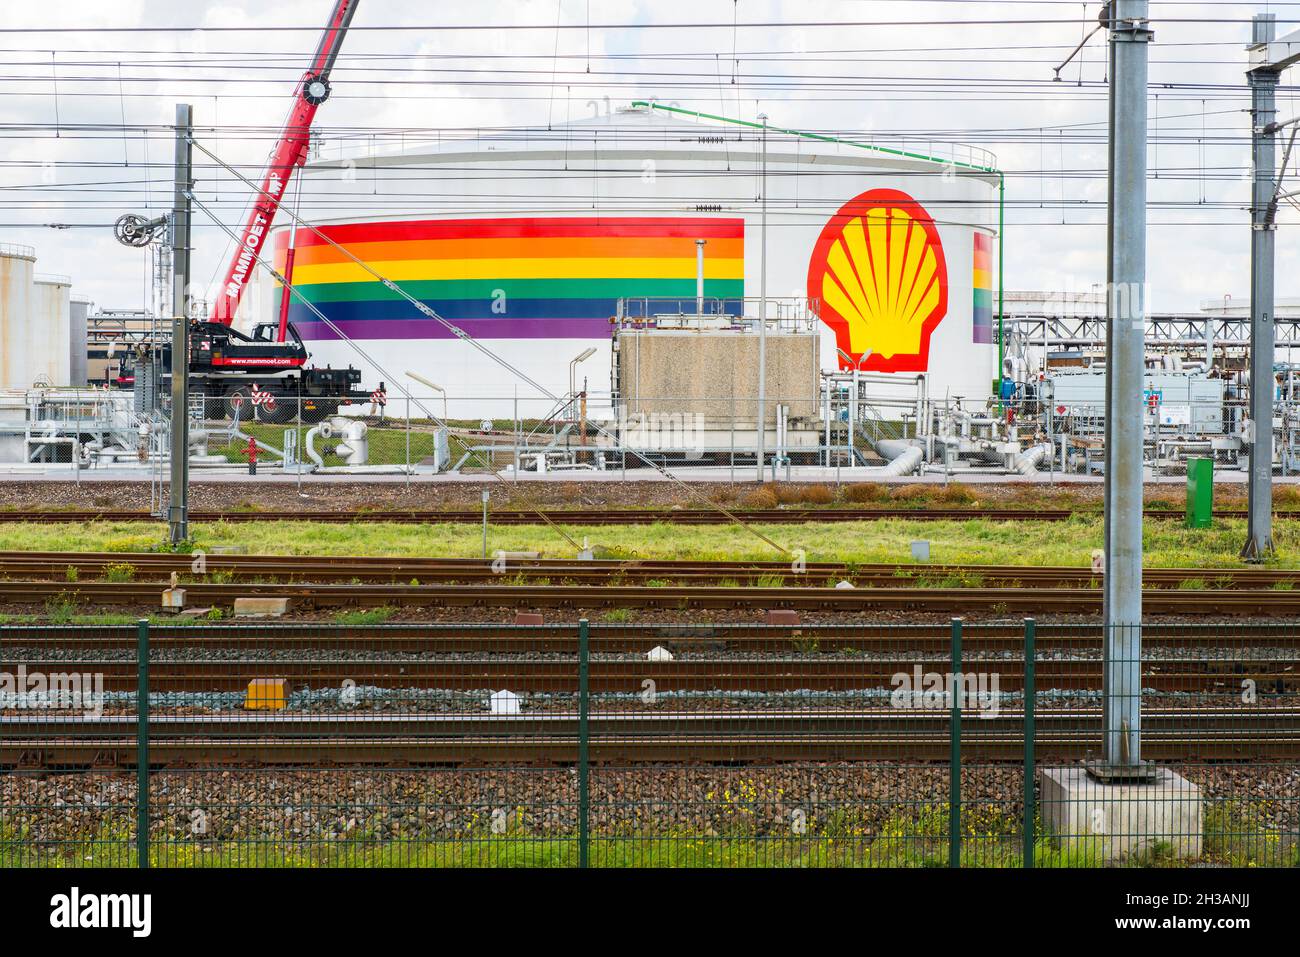 Rotterdam, Netherlands. Shell crude oil storage tank at Port of Rotterdam harbor near Pernis. Royal Shell is regularly subject to debate due to climate change and transition from fossil fuel production to renewable energy sources. Stock Photo